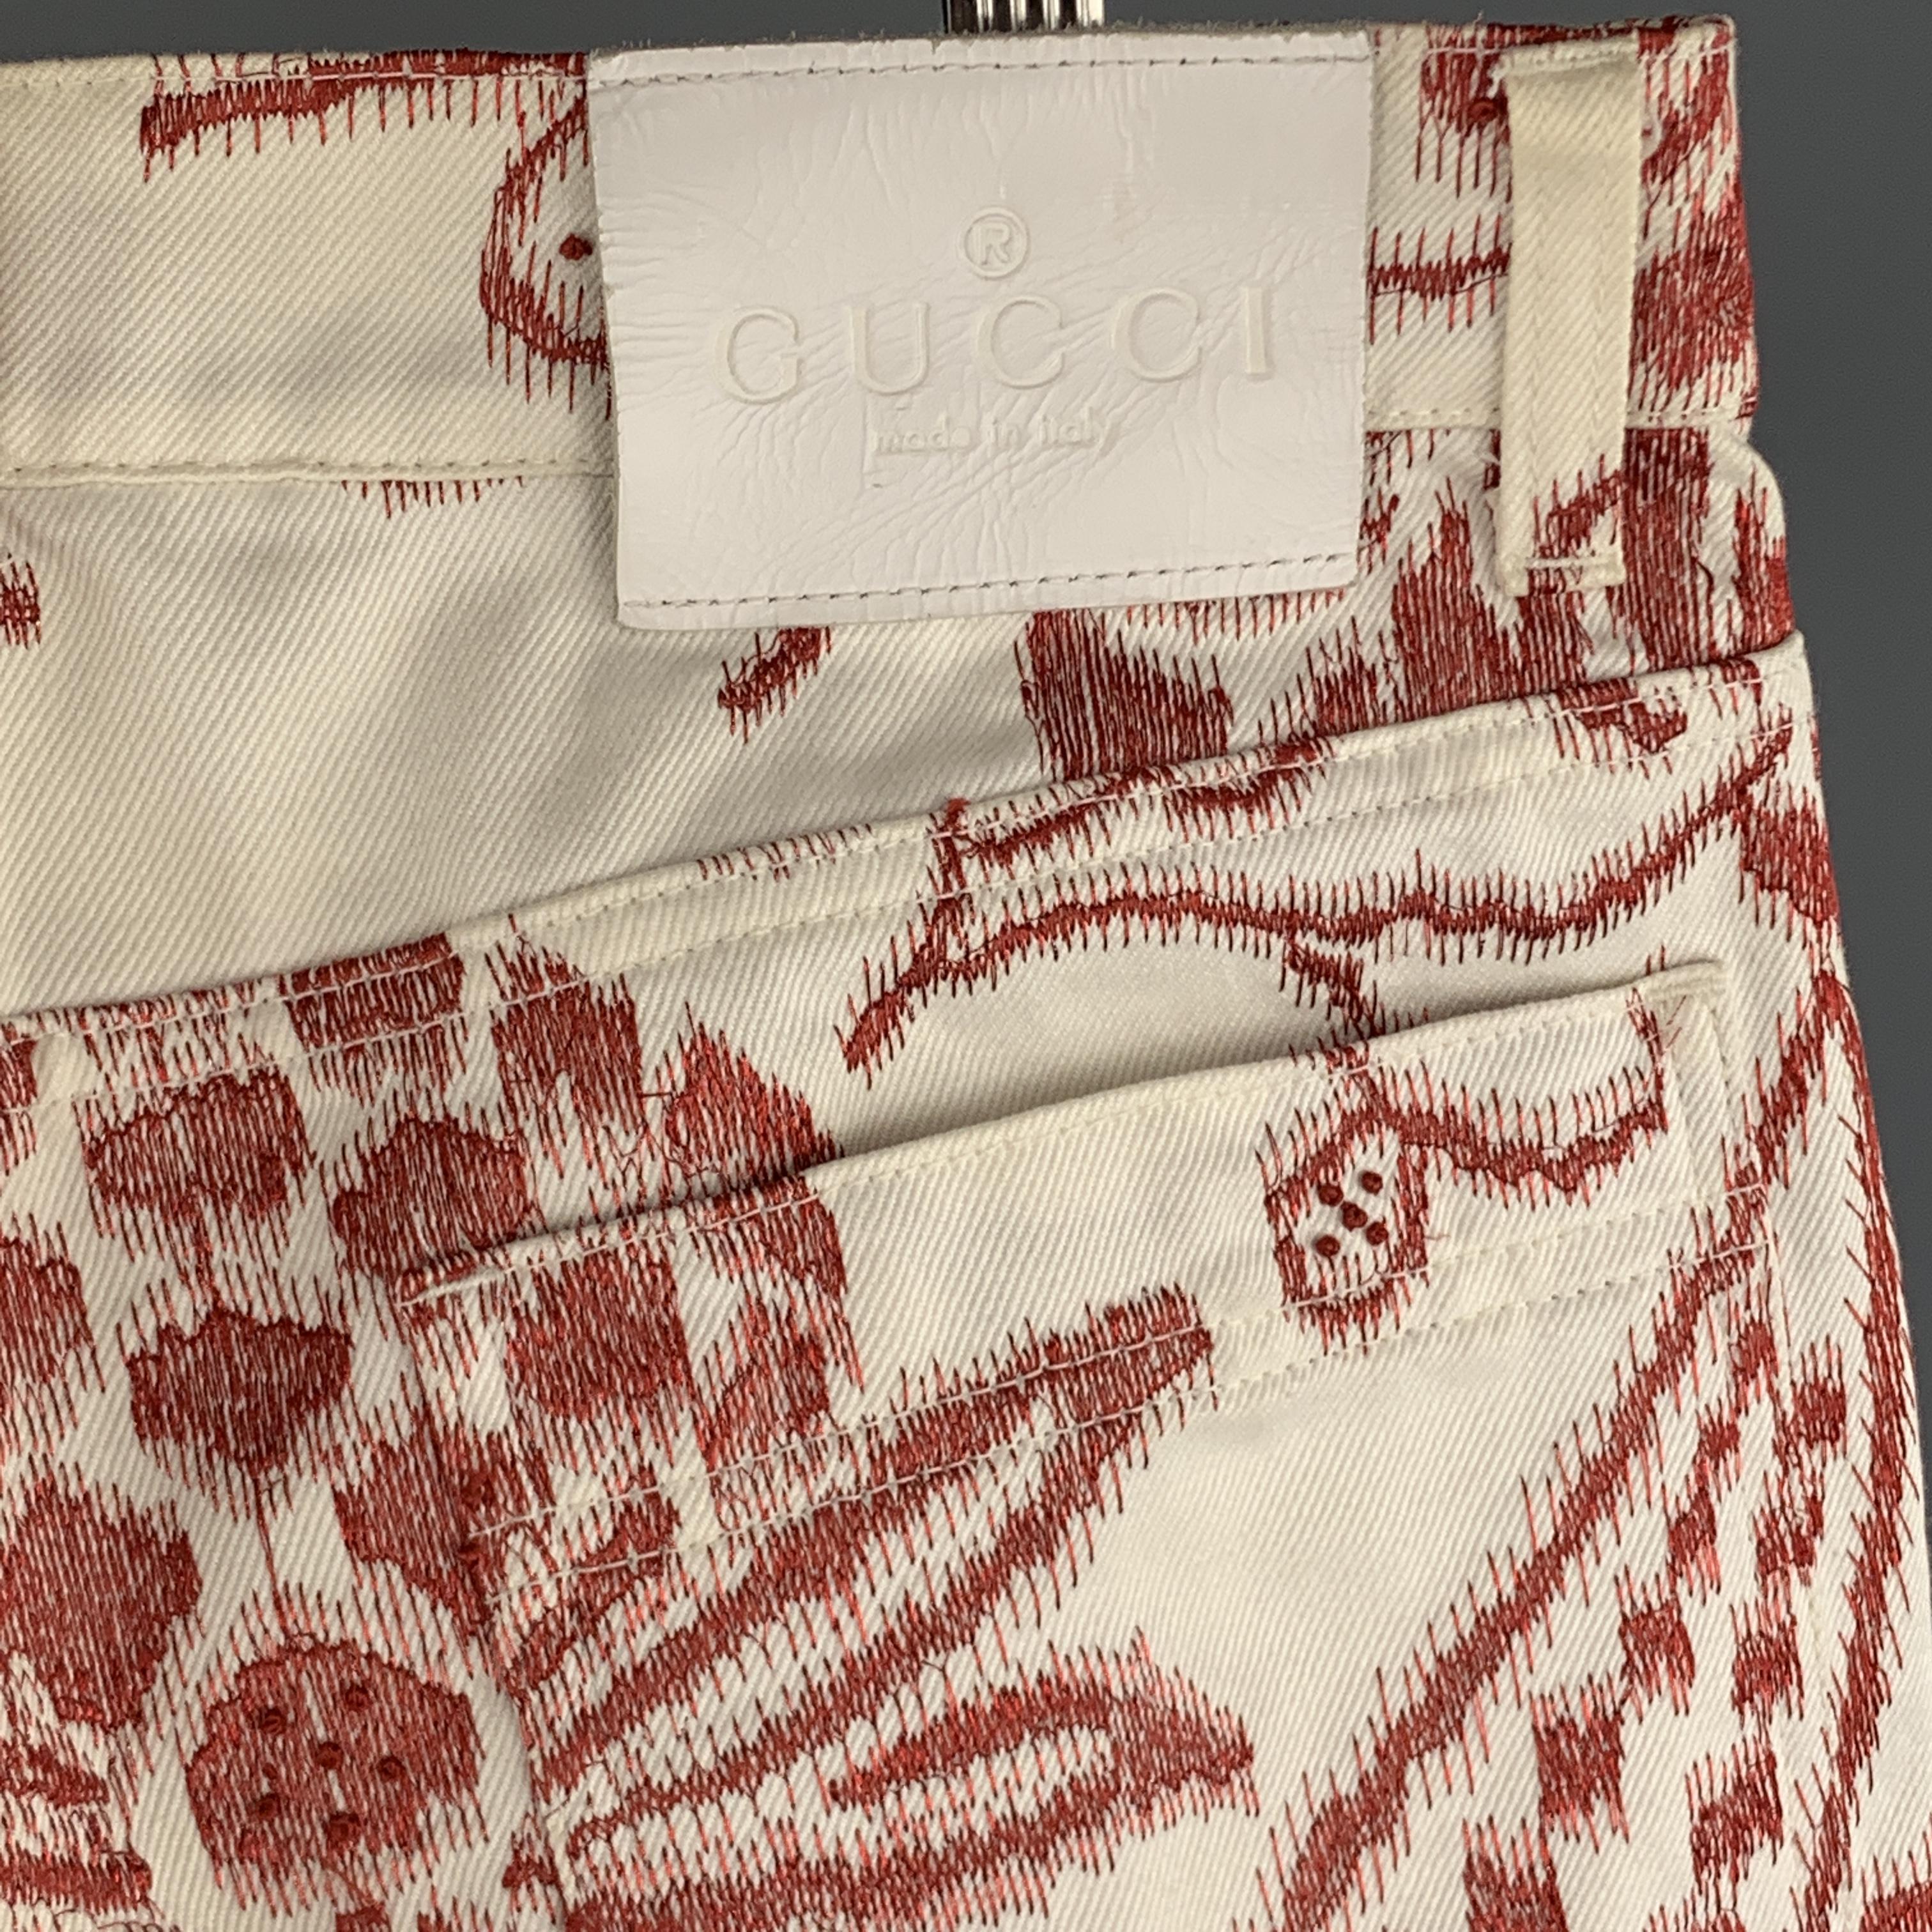 GUCCI by TOM FORD SS2000 Size 29 x 31 White Embroidery Cotton Bell Bottom Jeans 3